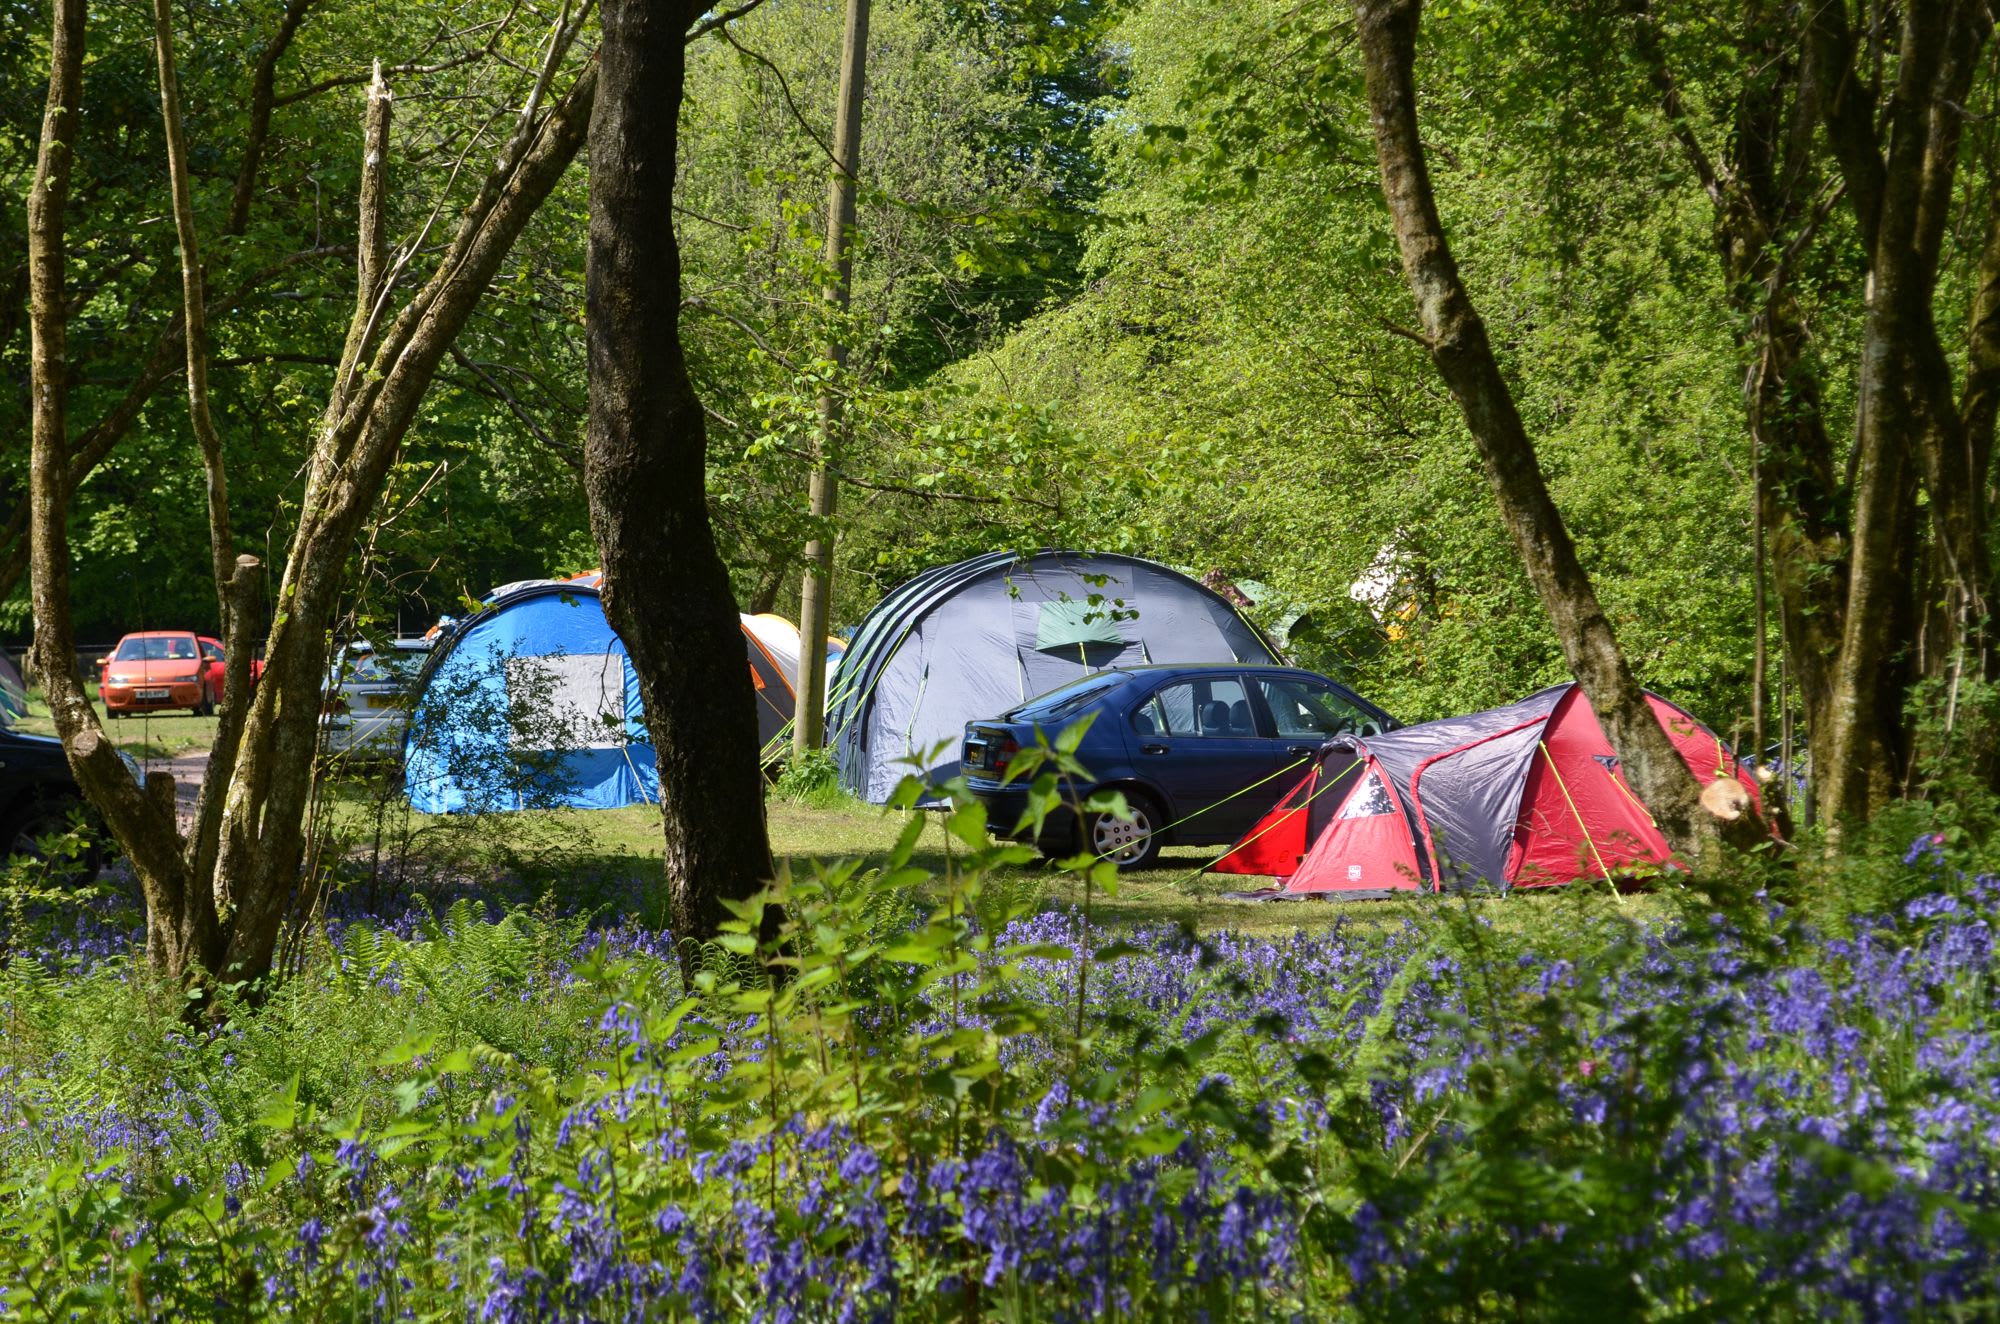 A beautiful countryside spot in Devon with a range of pitches, from grassy open spaces to off-grid woodland clearings, topped off by two well-stocked fishing lakes.